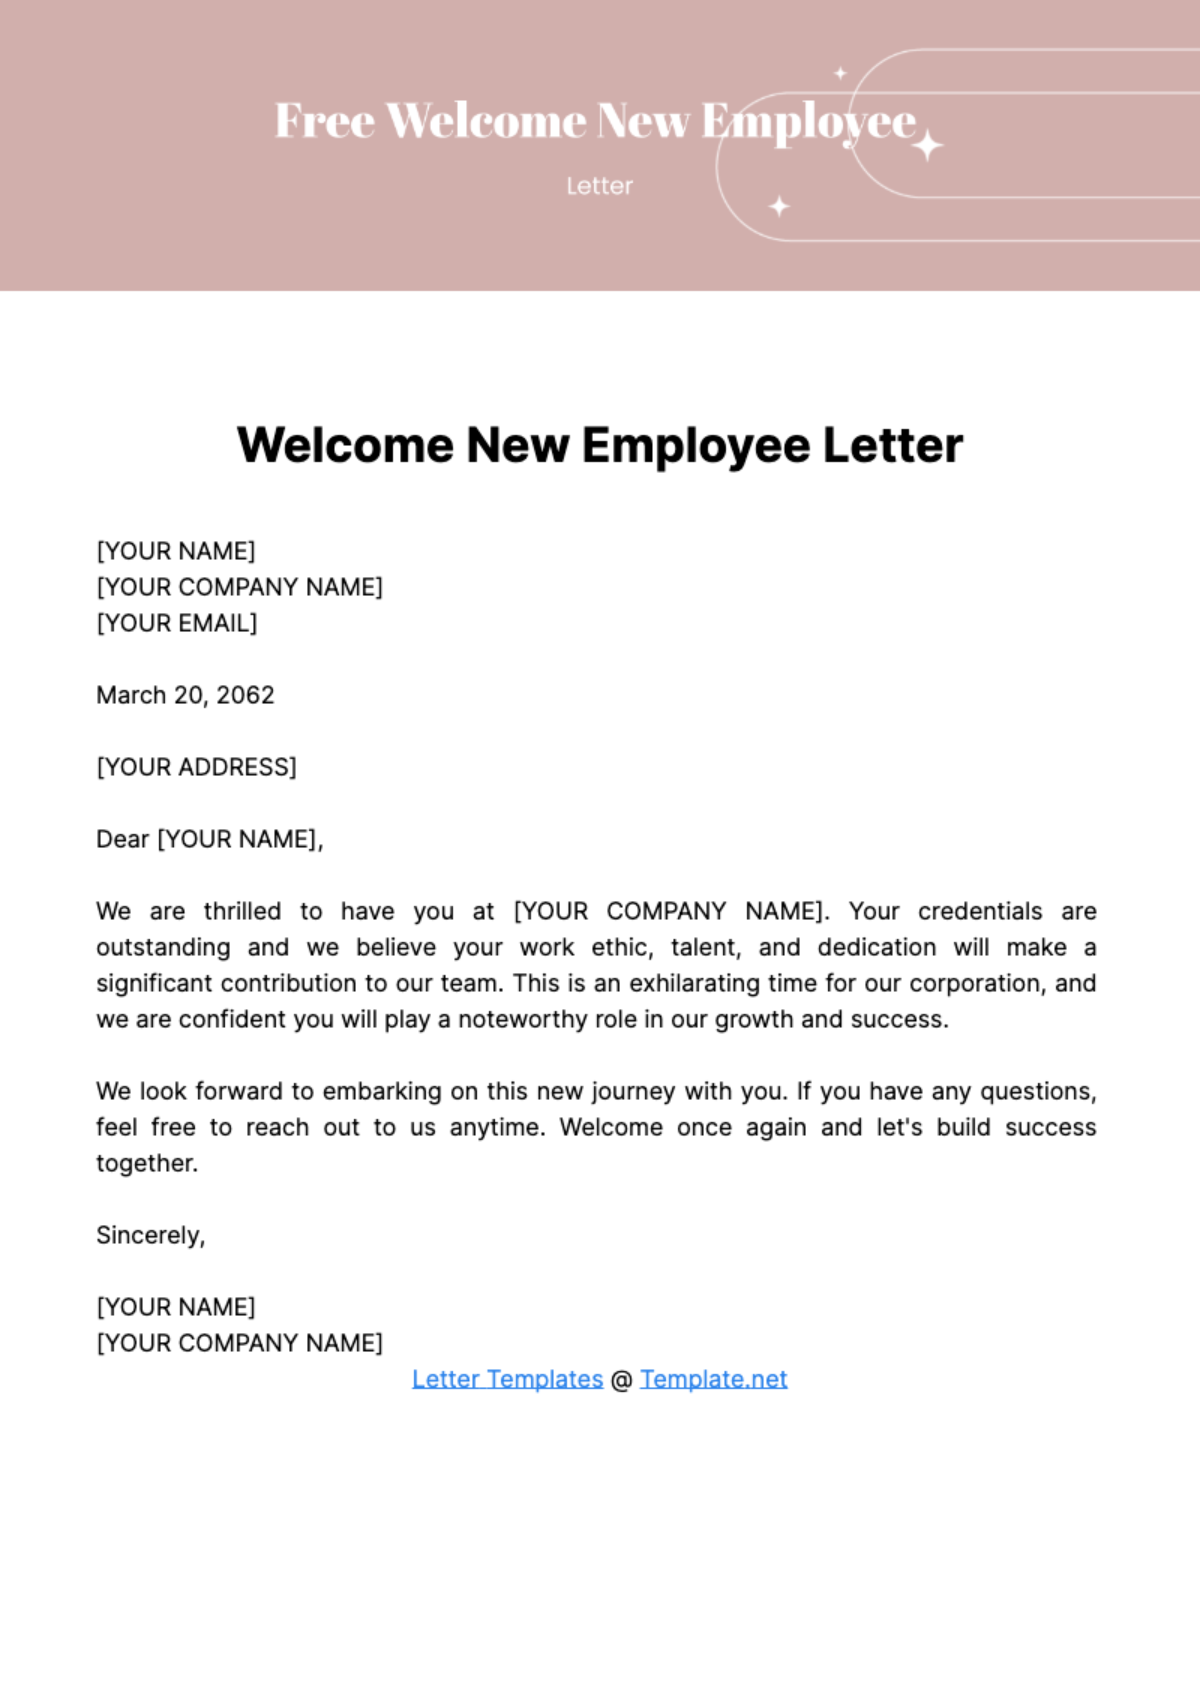 Welcome New Employee Letter Template